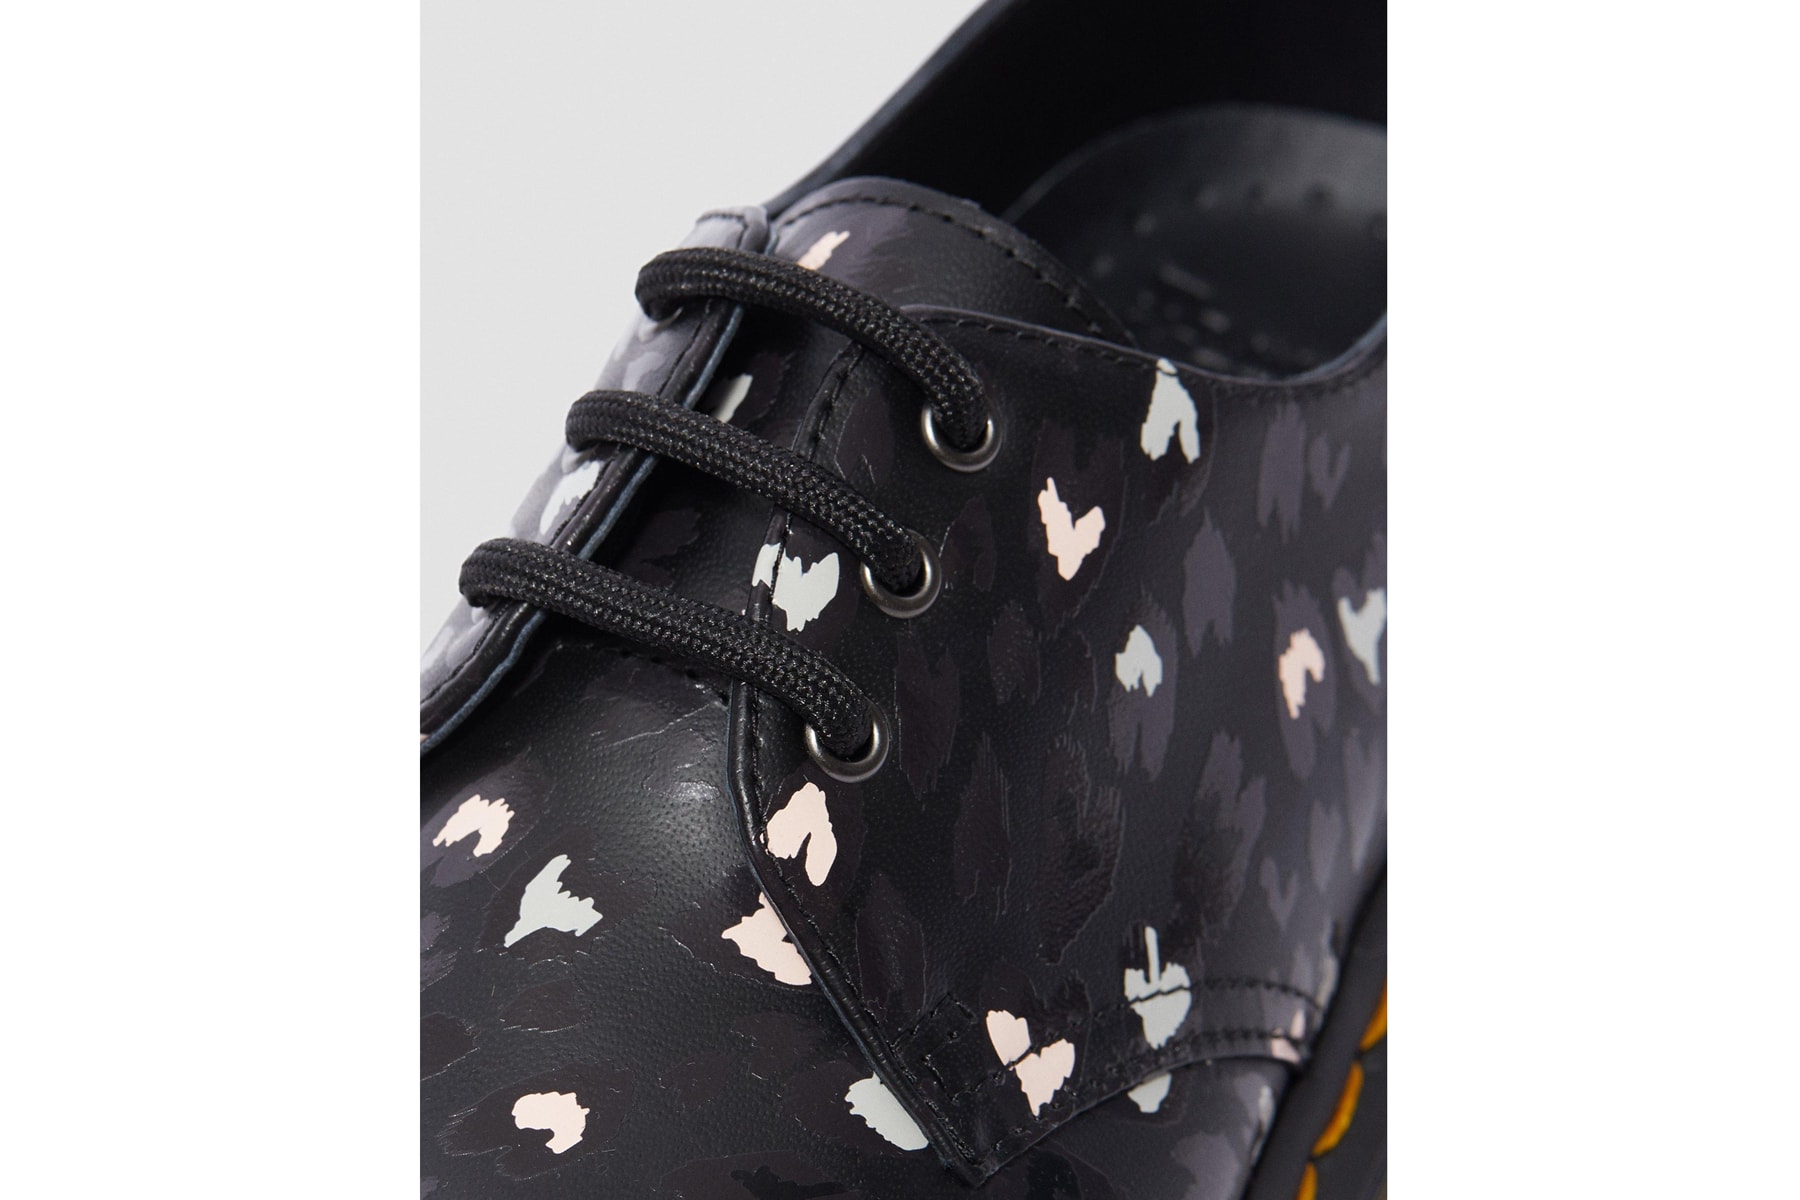 Dr. Martens Valentine's Day Collection 1460 1461 boots hearts release information wild hearts black and white print hearts